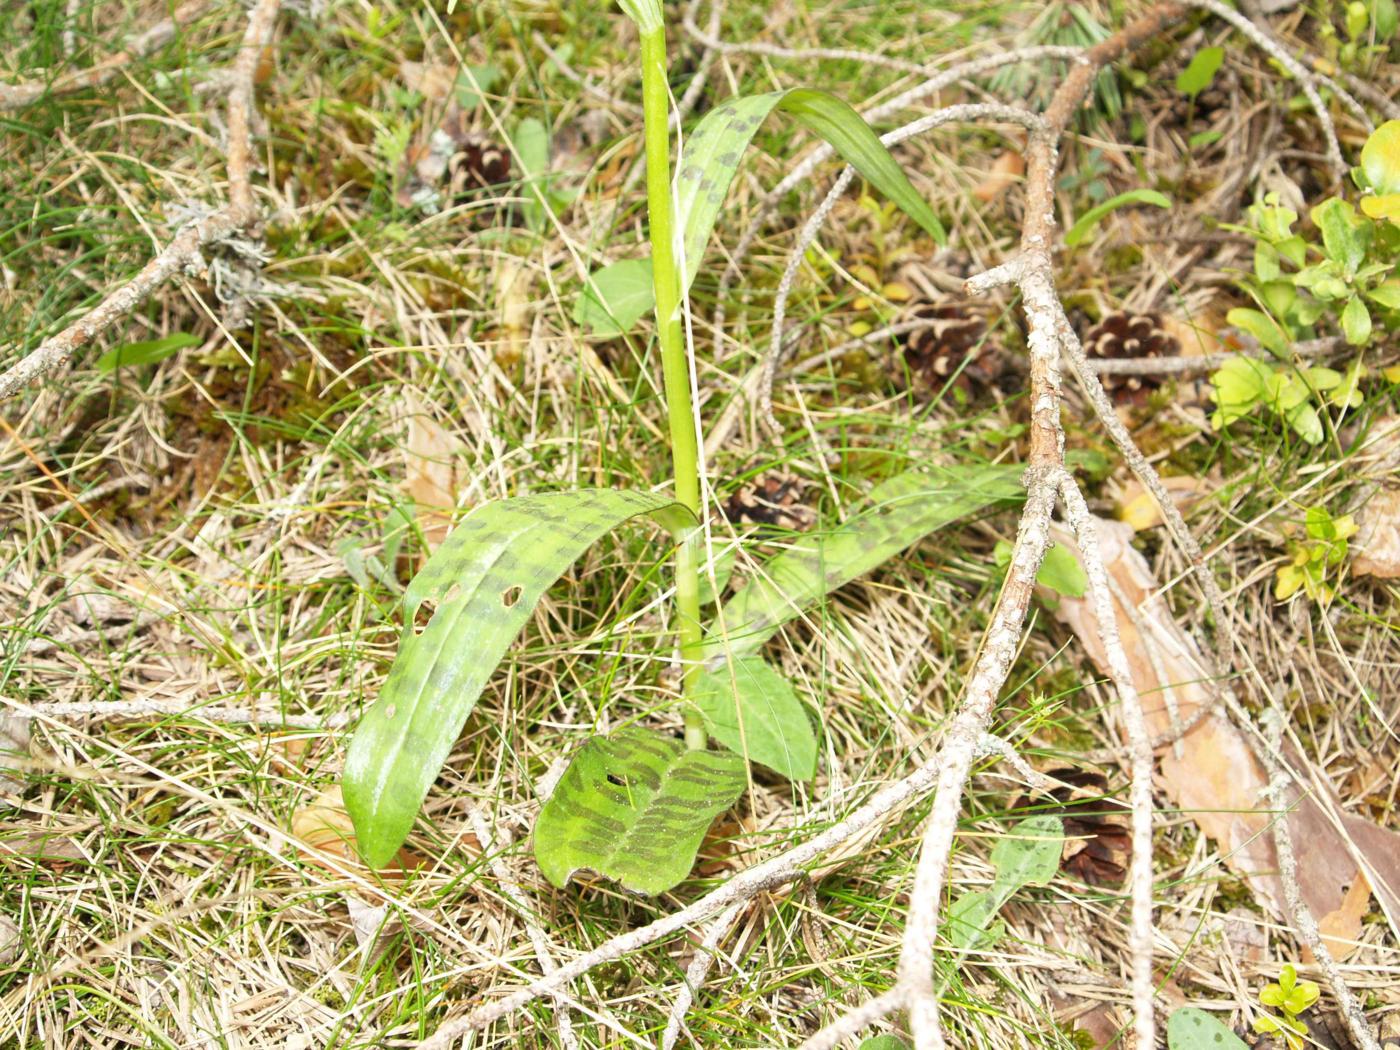 Orchid, Common Spotted leaf